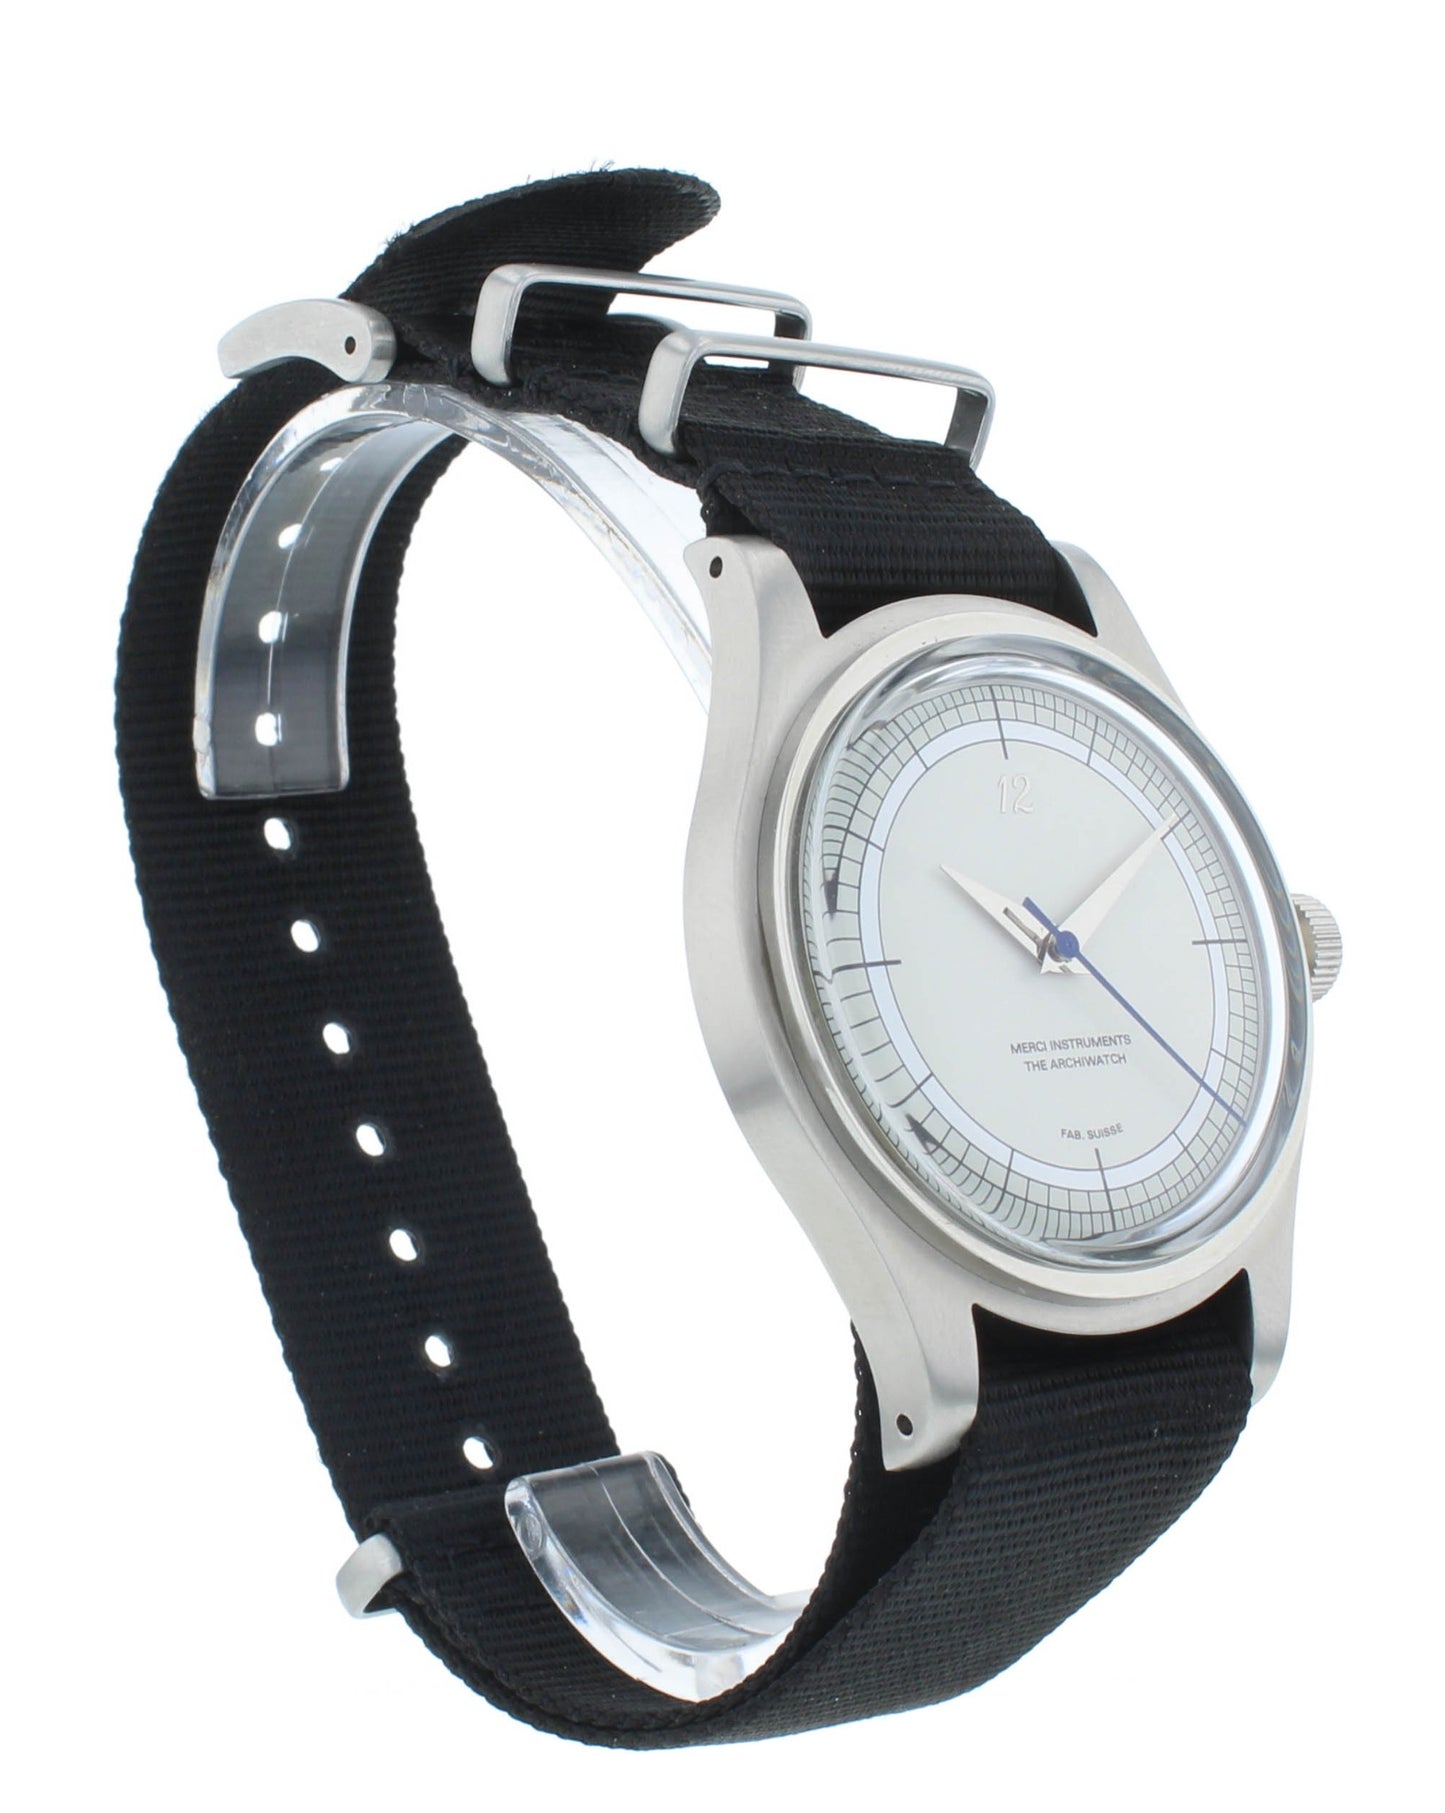 Archiwatch 38mm Mechanical White Dial Limited Edition Men's Watch LMM-01